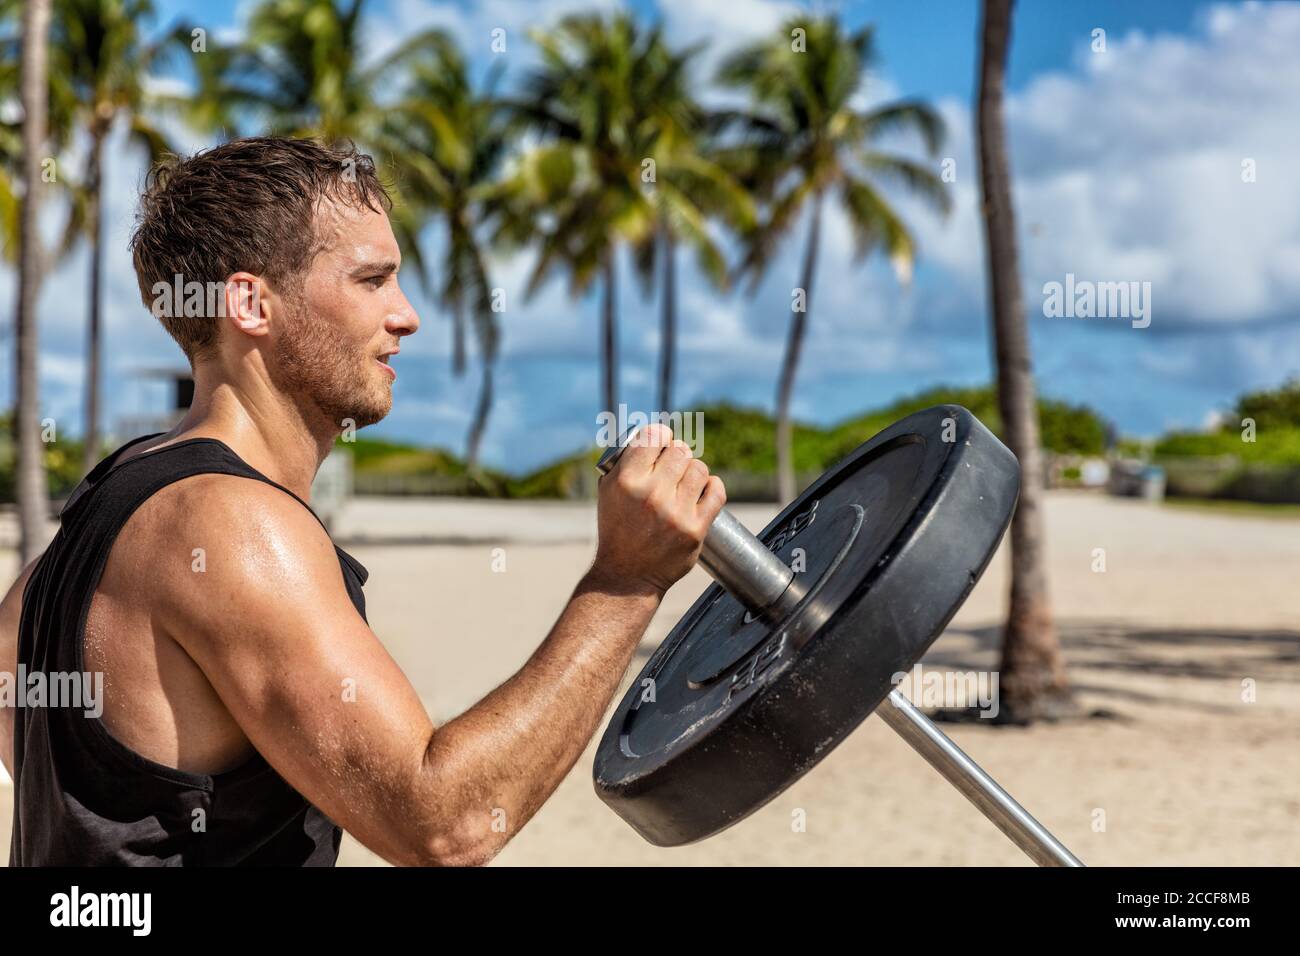 Outdoor calisthenics gym park male athlete working out on T-bar outside in summer. Man workout strength training arms biceps muscles with heavy Stock Photo